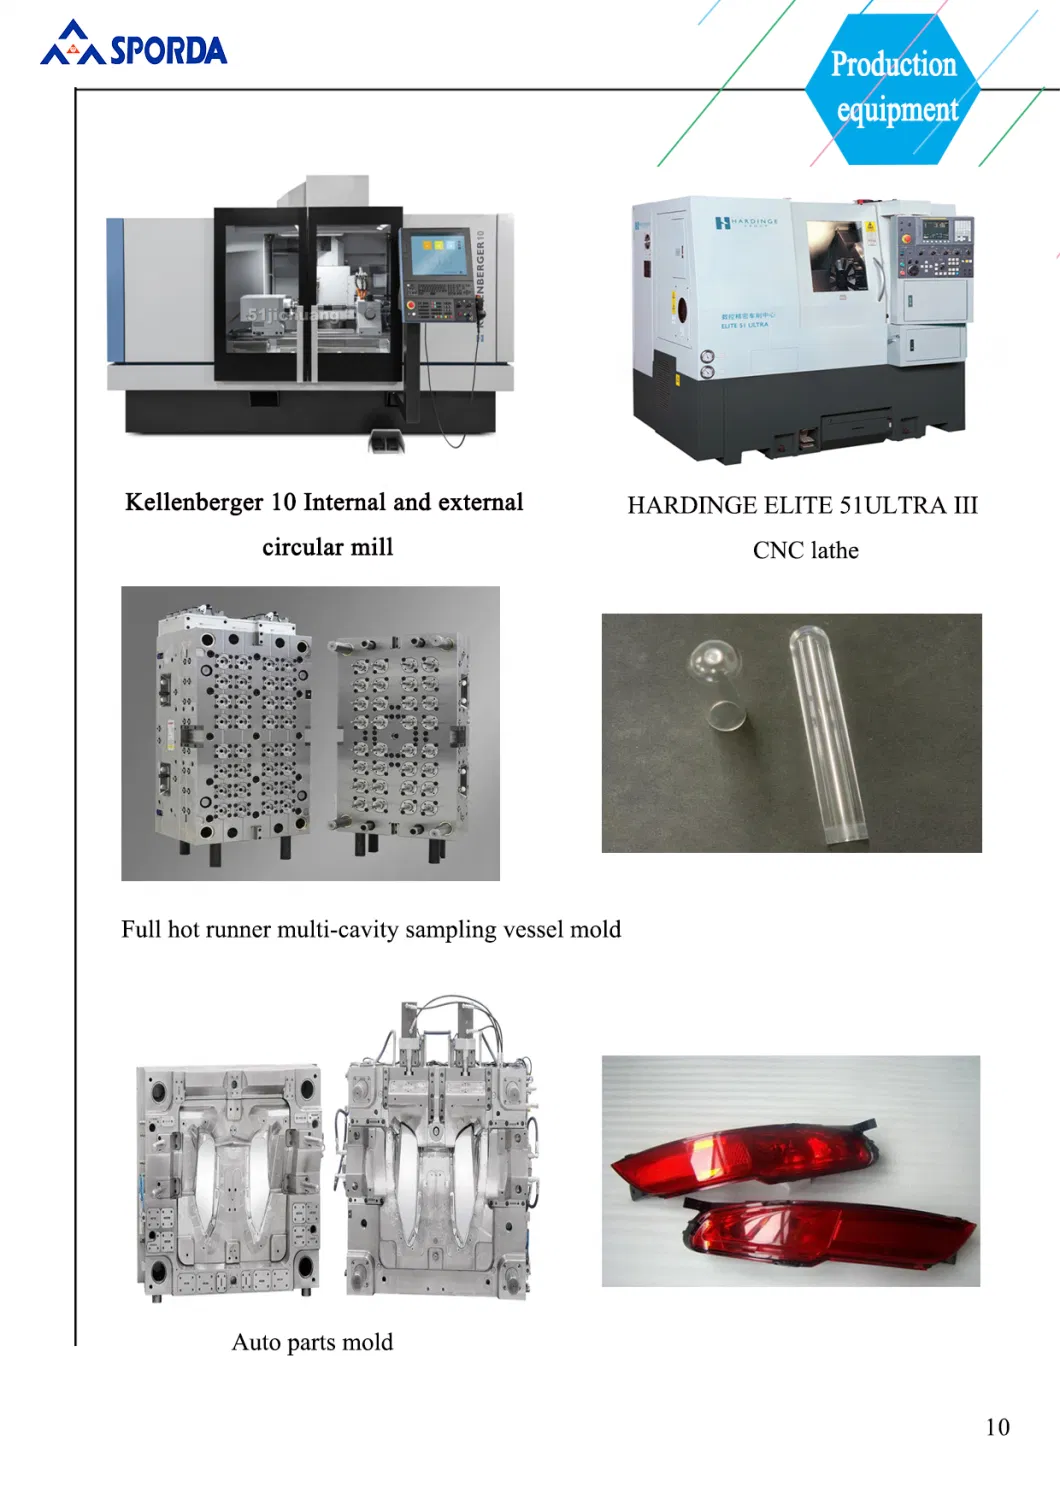 Mould OEM Plastic Film+Wooden Case Rapid Creation Aerospace-Grade Injection Mold with ISO